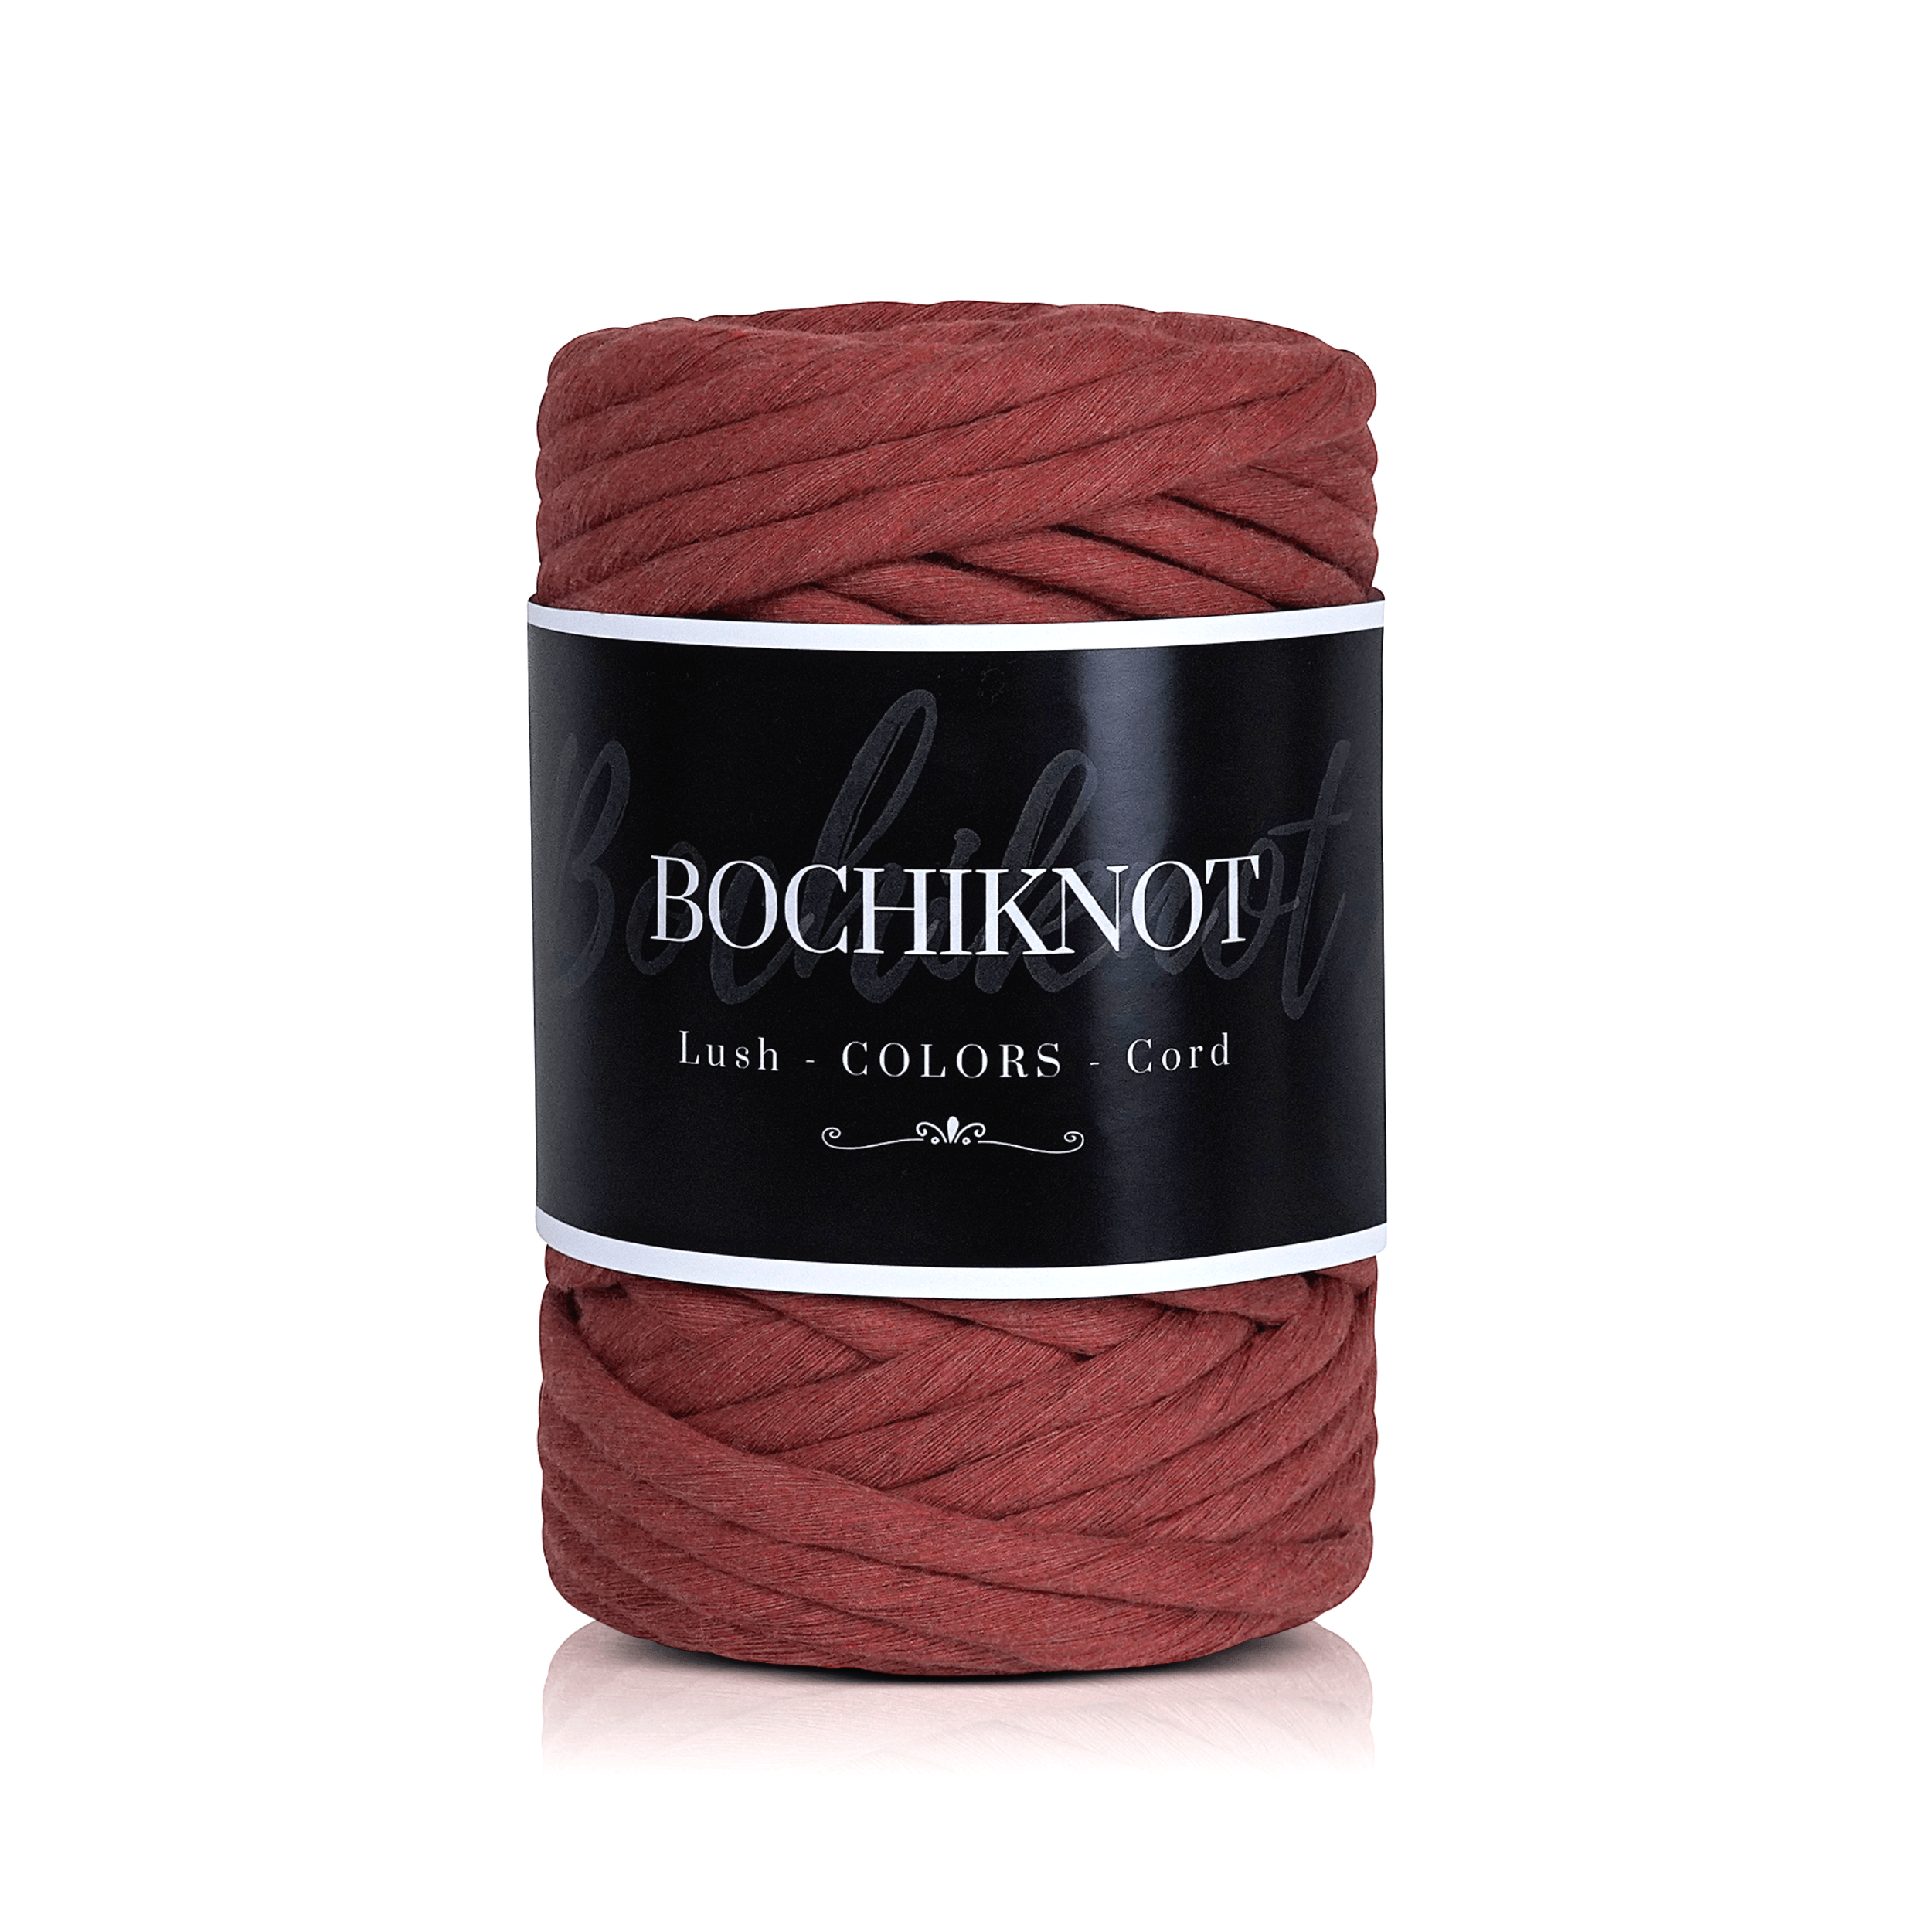 Hesroicy 1 Roll 2mm Macrame Cord Colorful Colorfast Soft Twisted Cotton Rope  Macrame Yarn for Knitting 